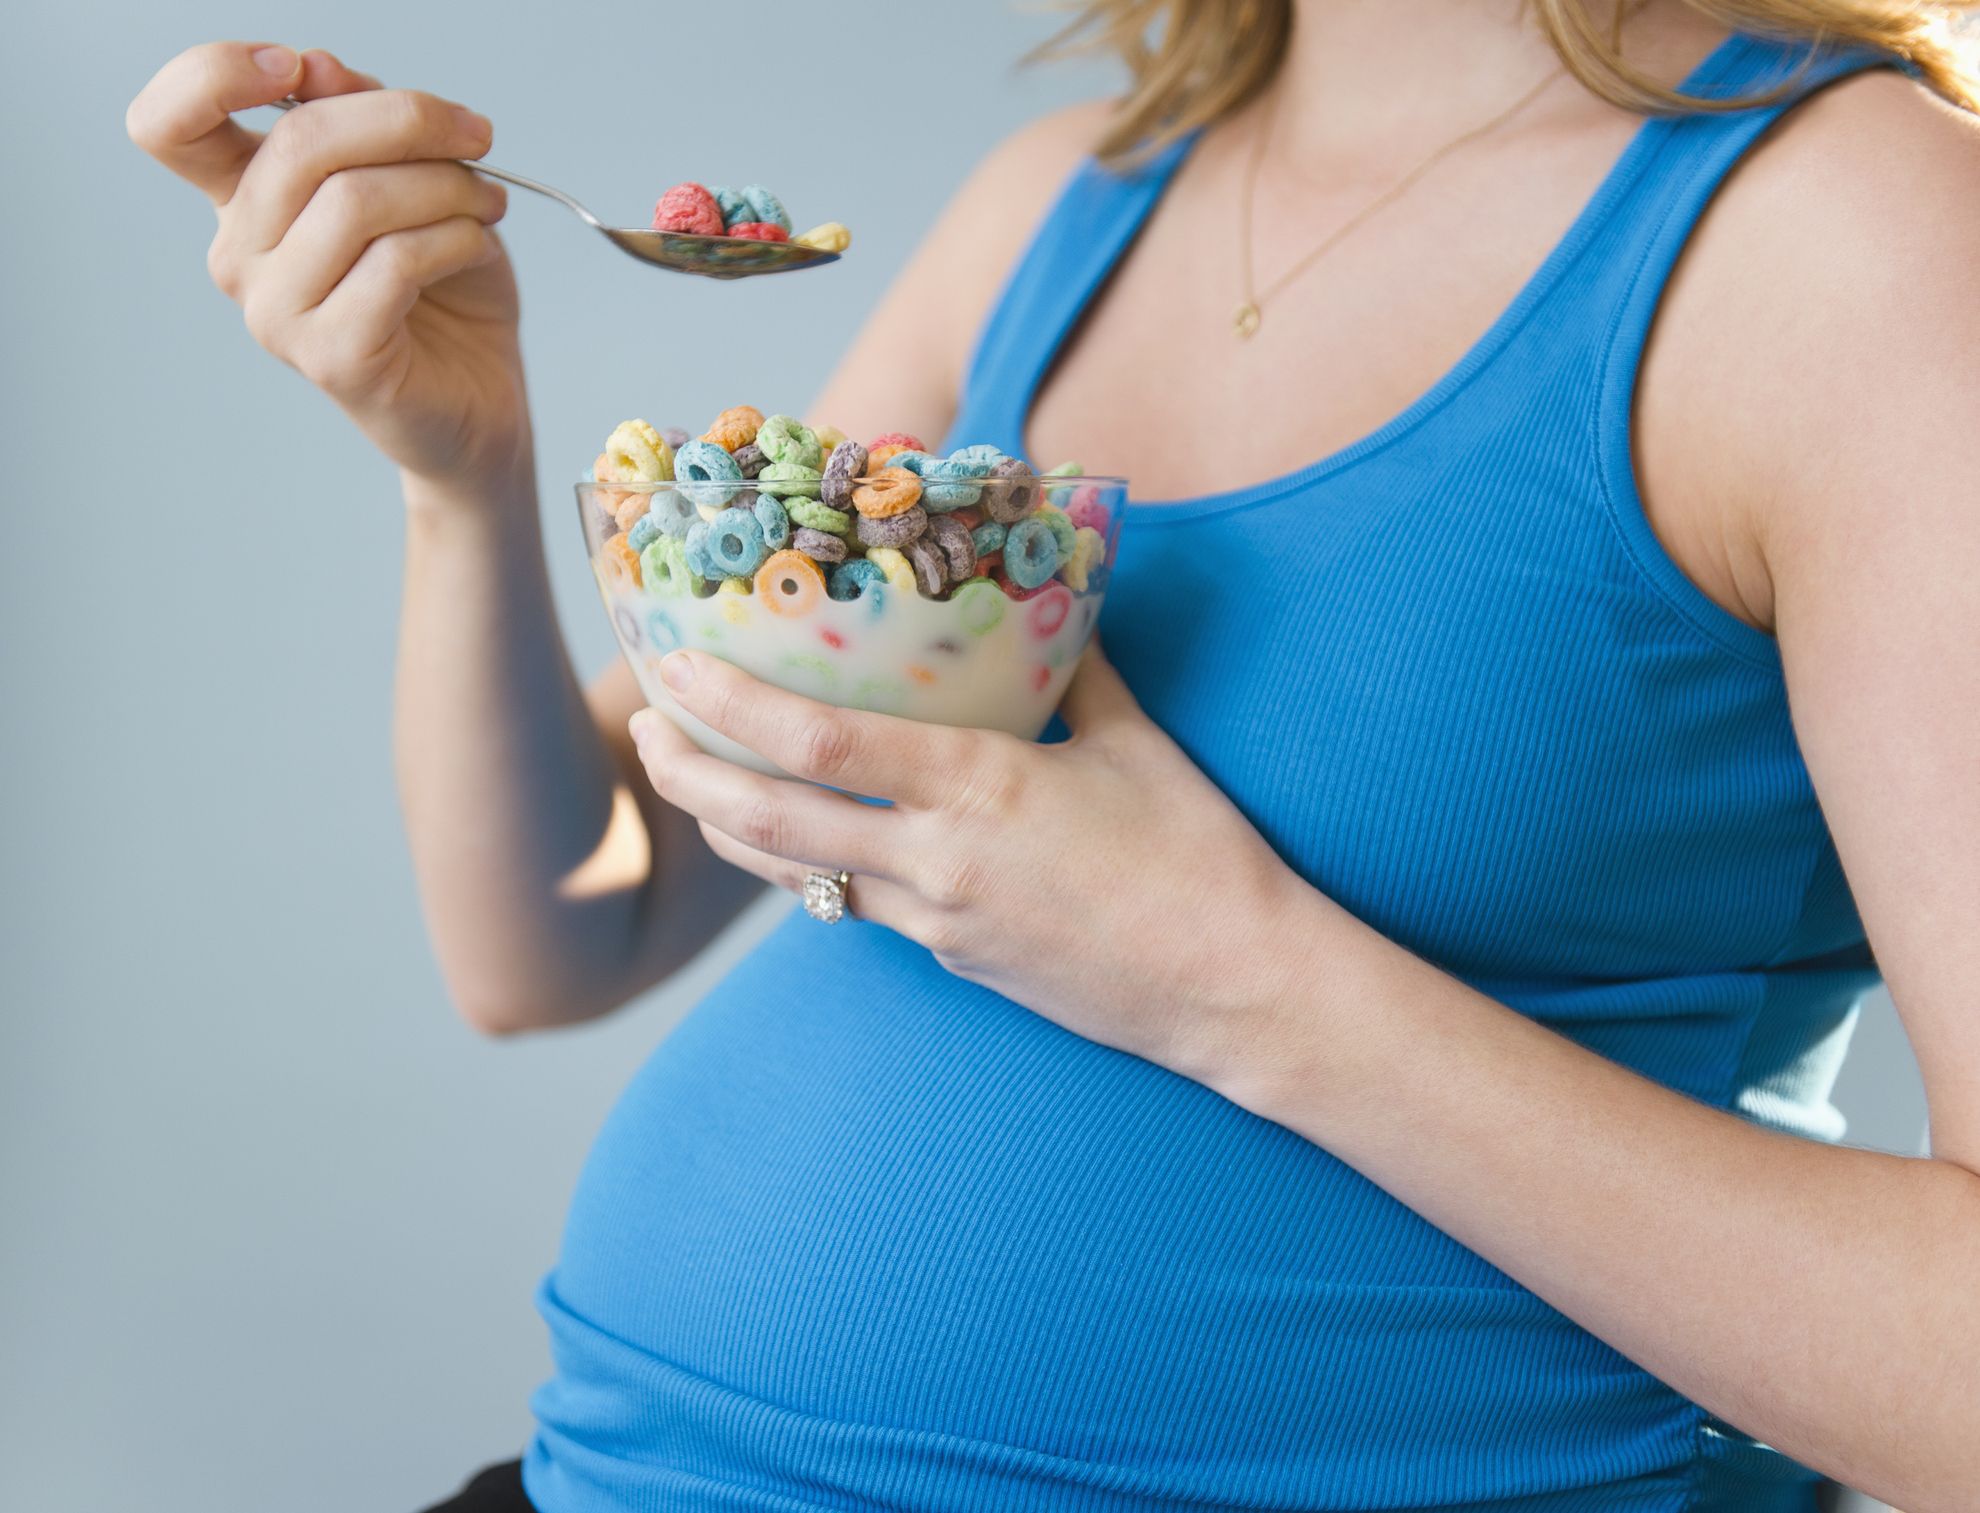 Pregnancy foods to avoid when you're expecting